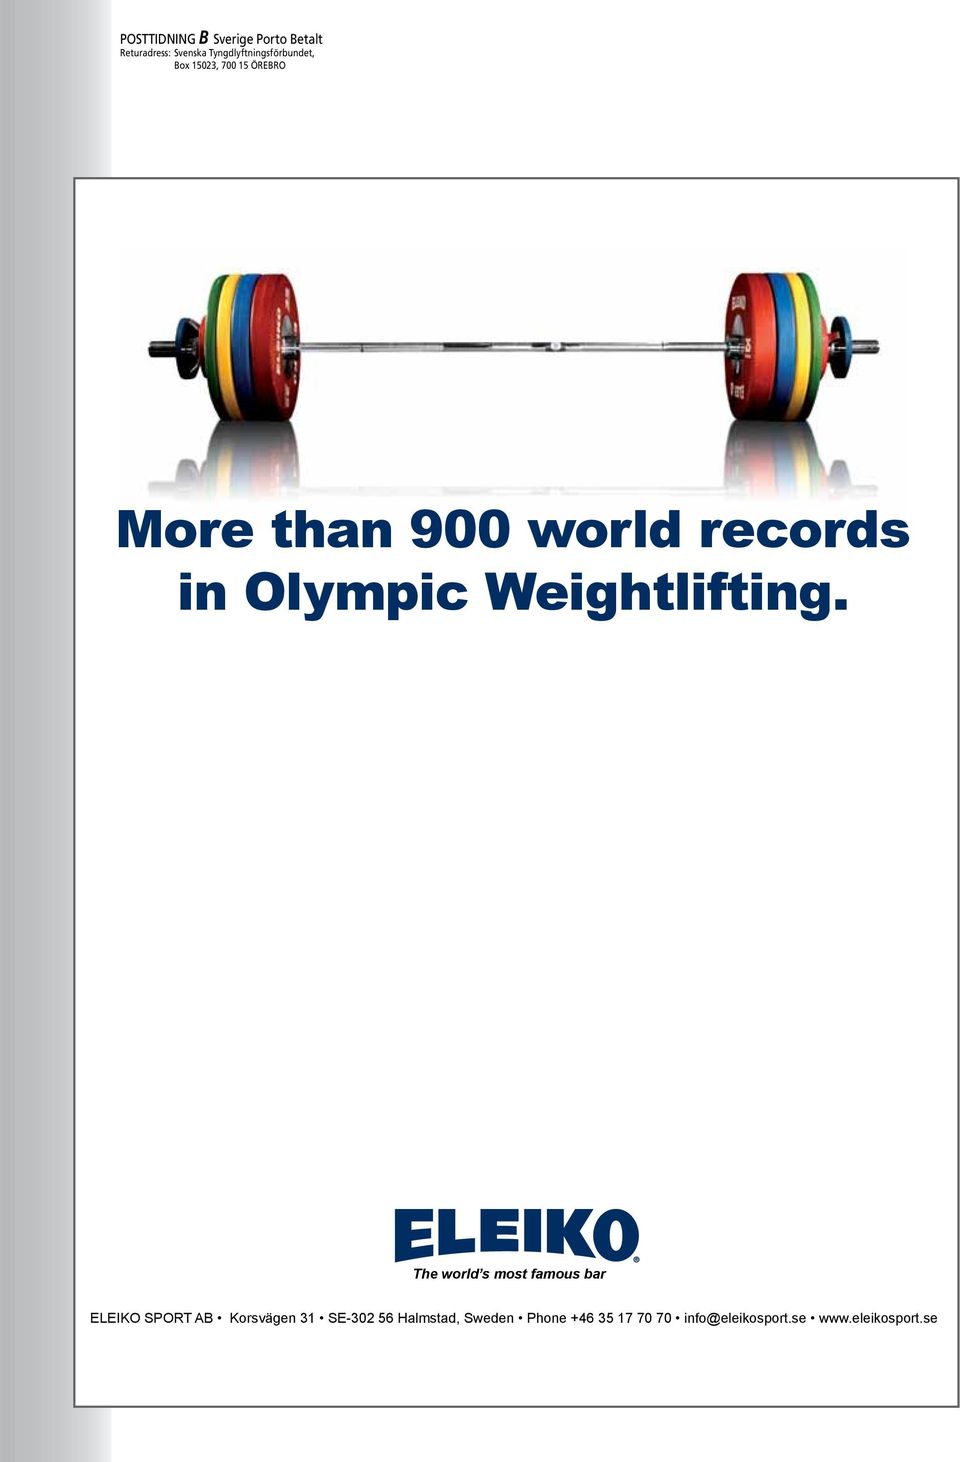 records in Olympic Weightlifting.